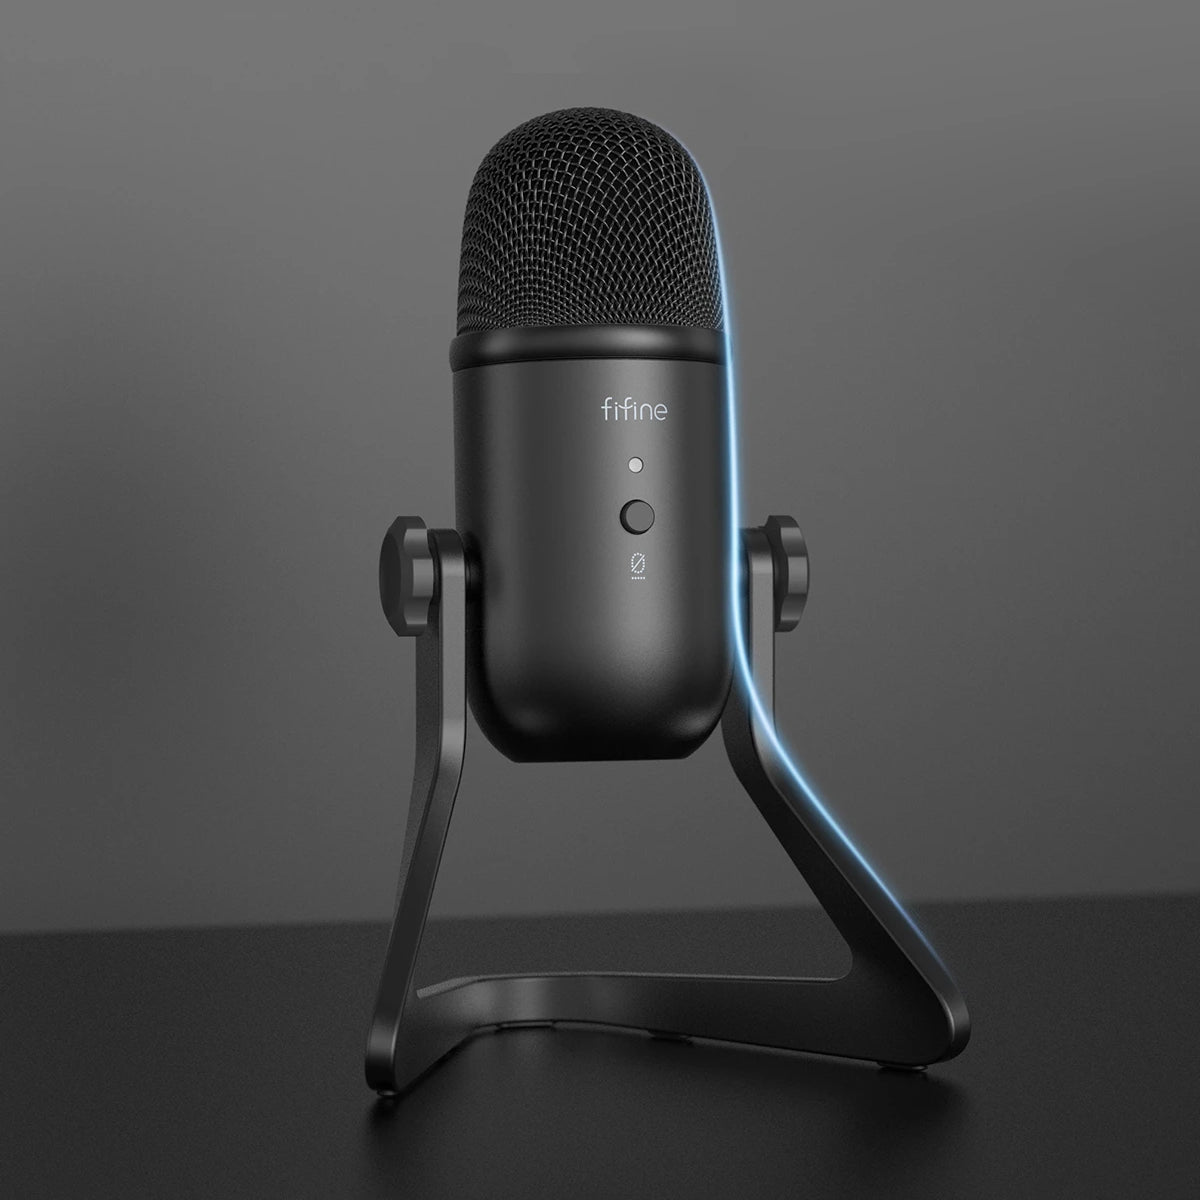 FIFINE K678 Studio USB Mic with A Live Monitoring, Gain Controls, A Mute  Button for Podcasting